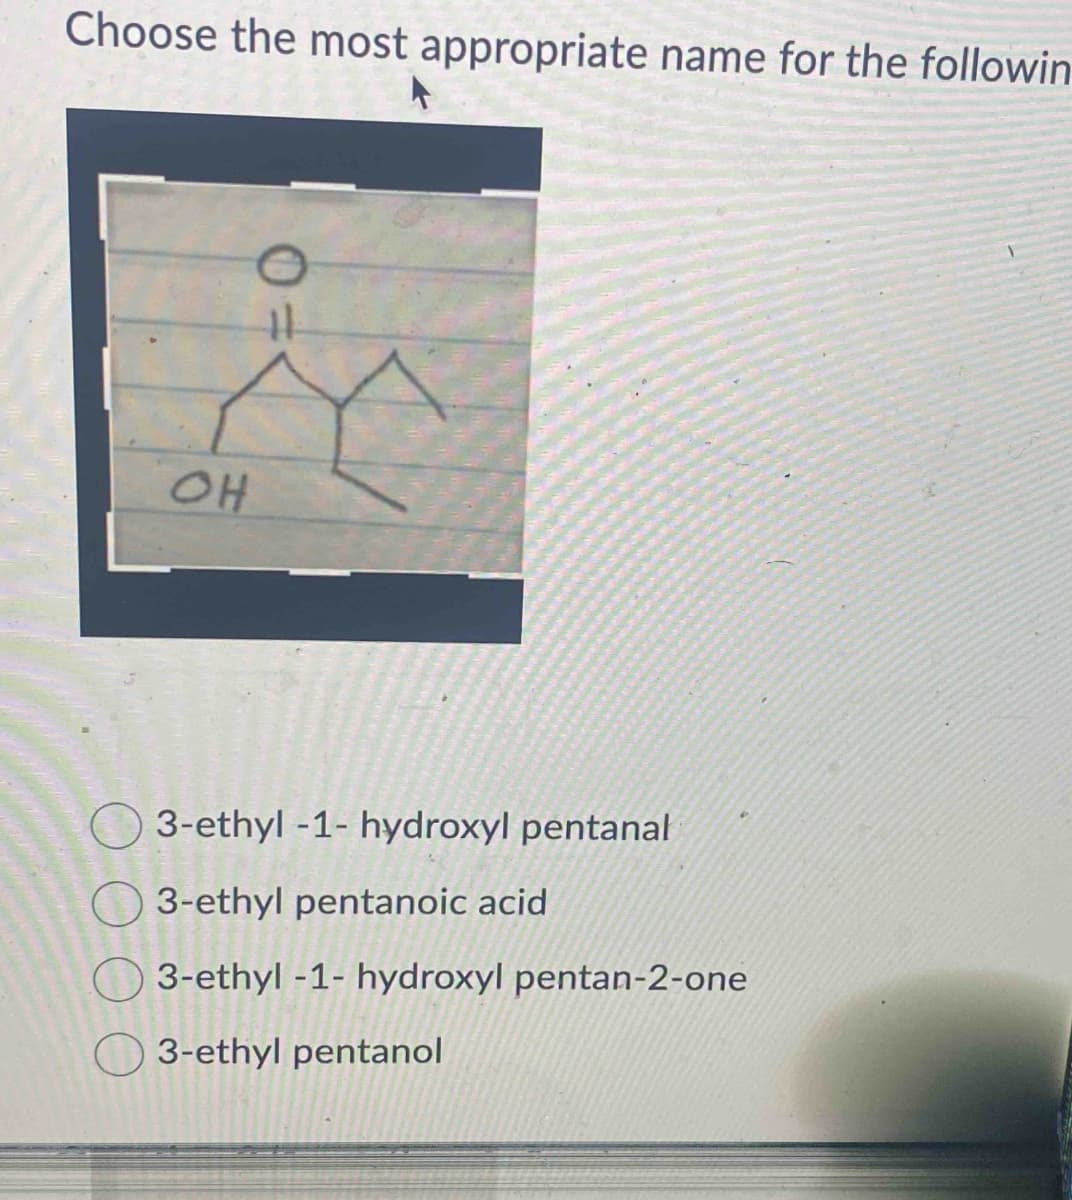 Choose the most appropriate name for the followin
OH
11
3-ethyl-1- hydroxyl pentanal
3-ethyl pentanoic acid
3-ethyl-1-hydroxyl pentan-2-one
3-ethyl pentanol